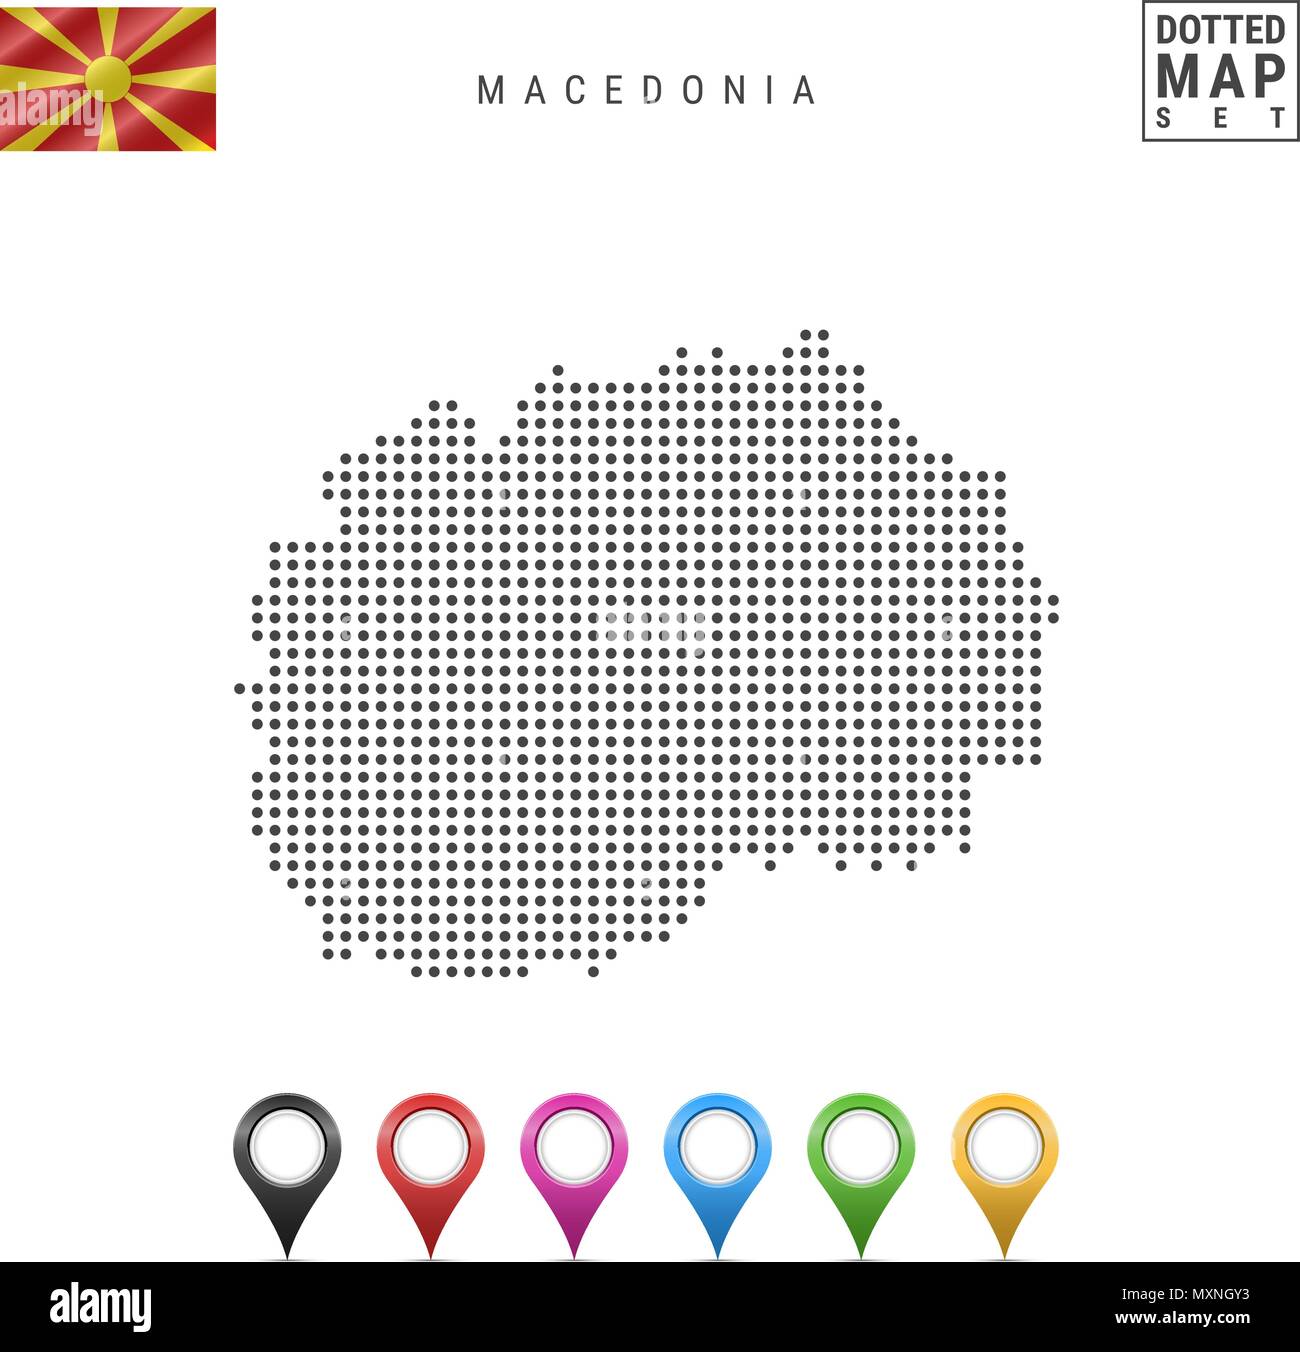 Vector Dotted Map of Macedonia. Simple Silhouette of Macedonia. National Flag of Macedonia. Multicolored Map Markers Stock Vector